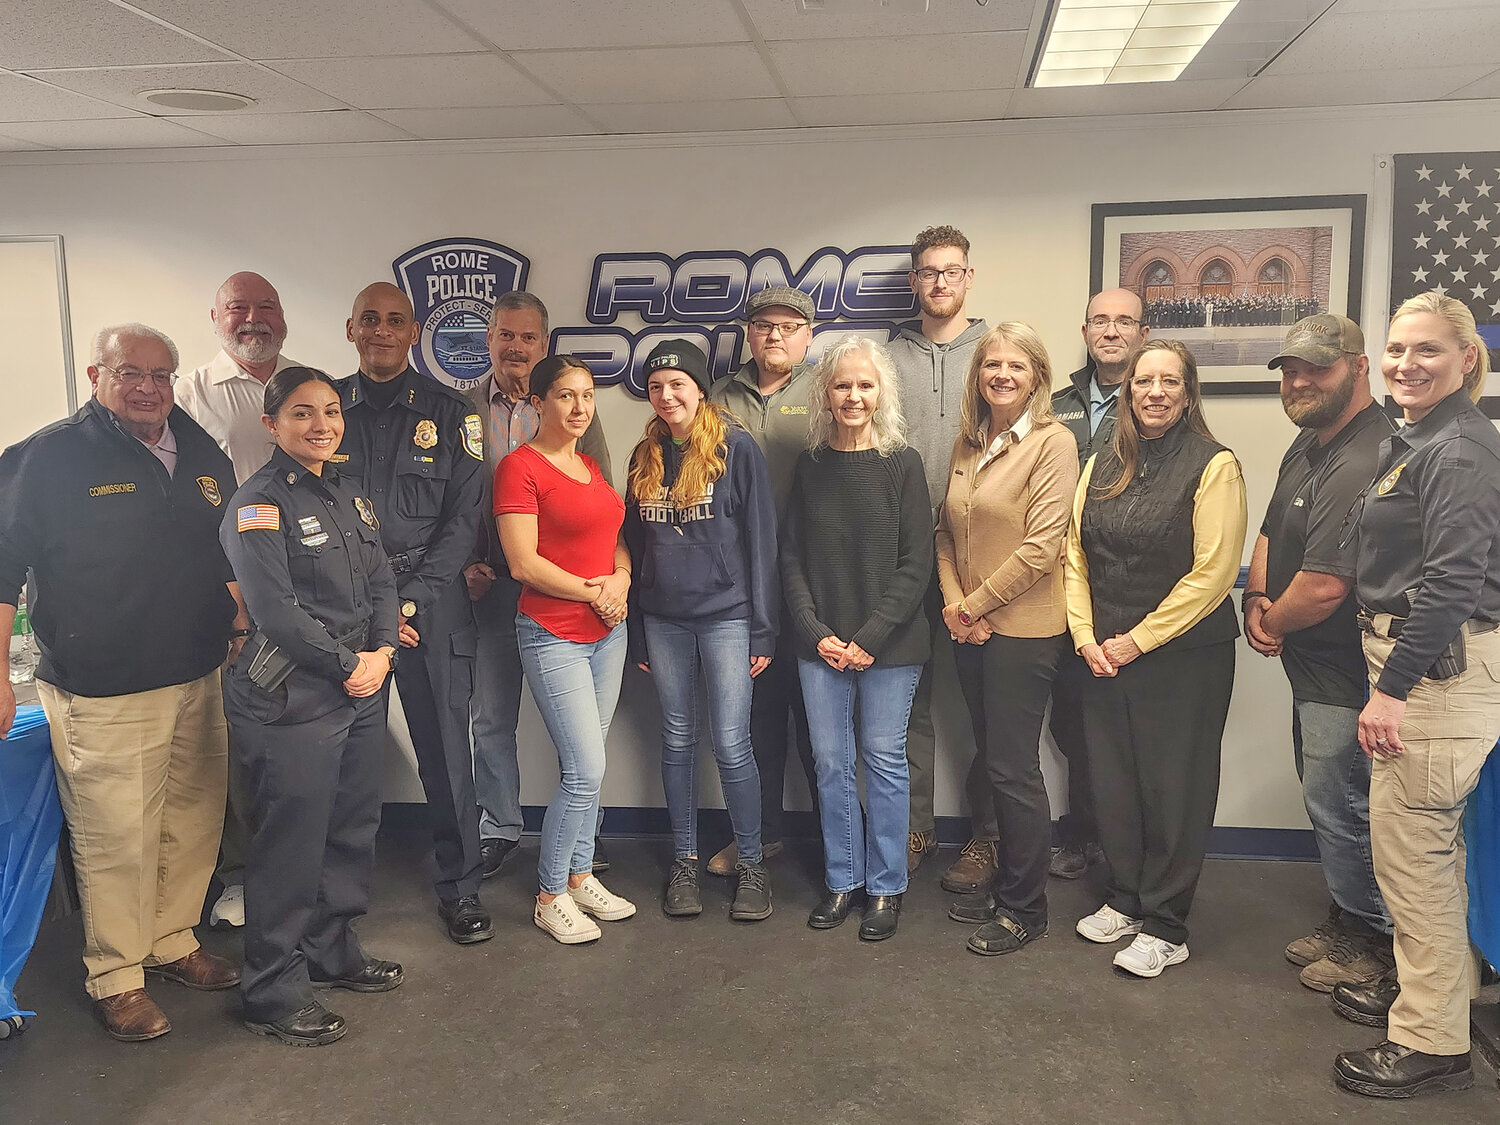 The 12 graduates of the Rome Police Department’s Citizens’ Police Academy pose with members of the department at the Justice Building Wednesday evening.